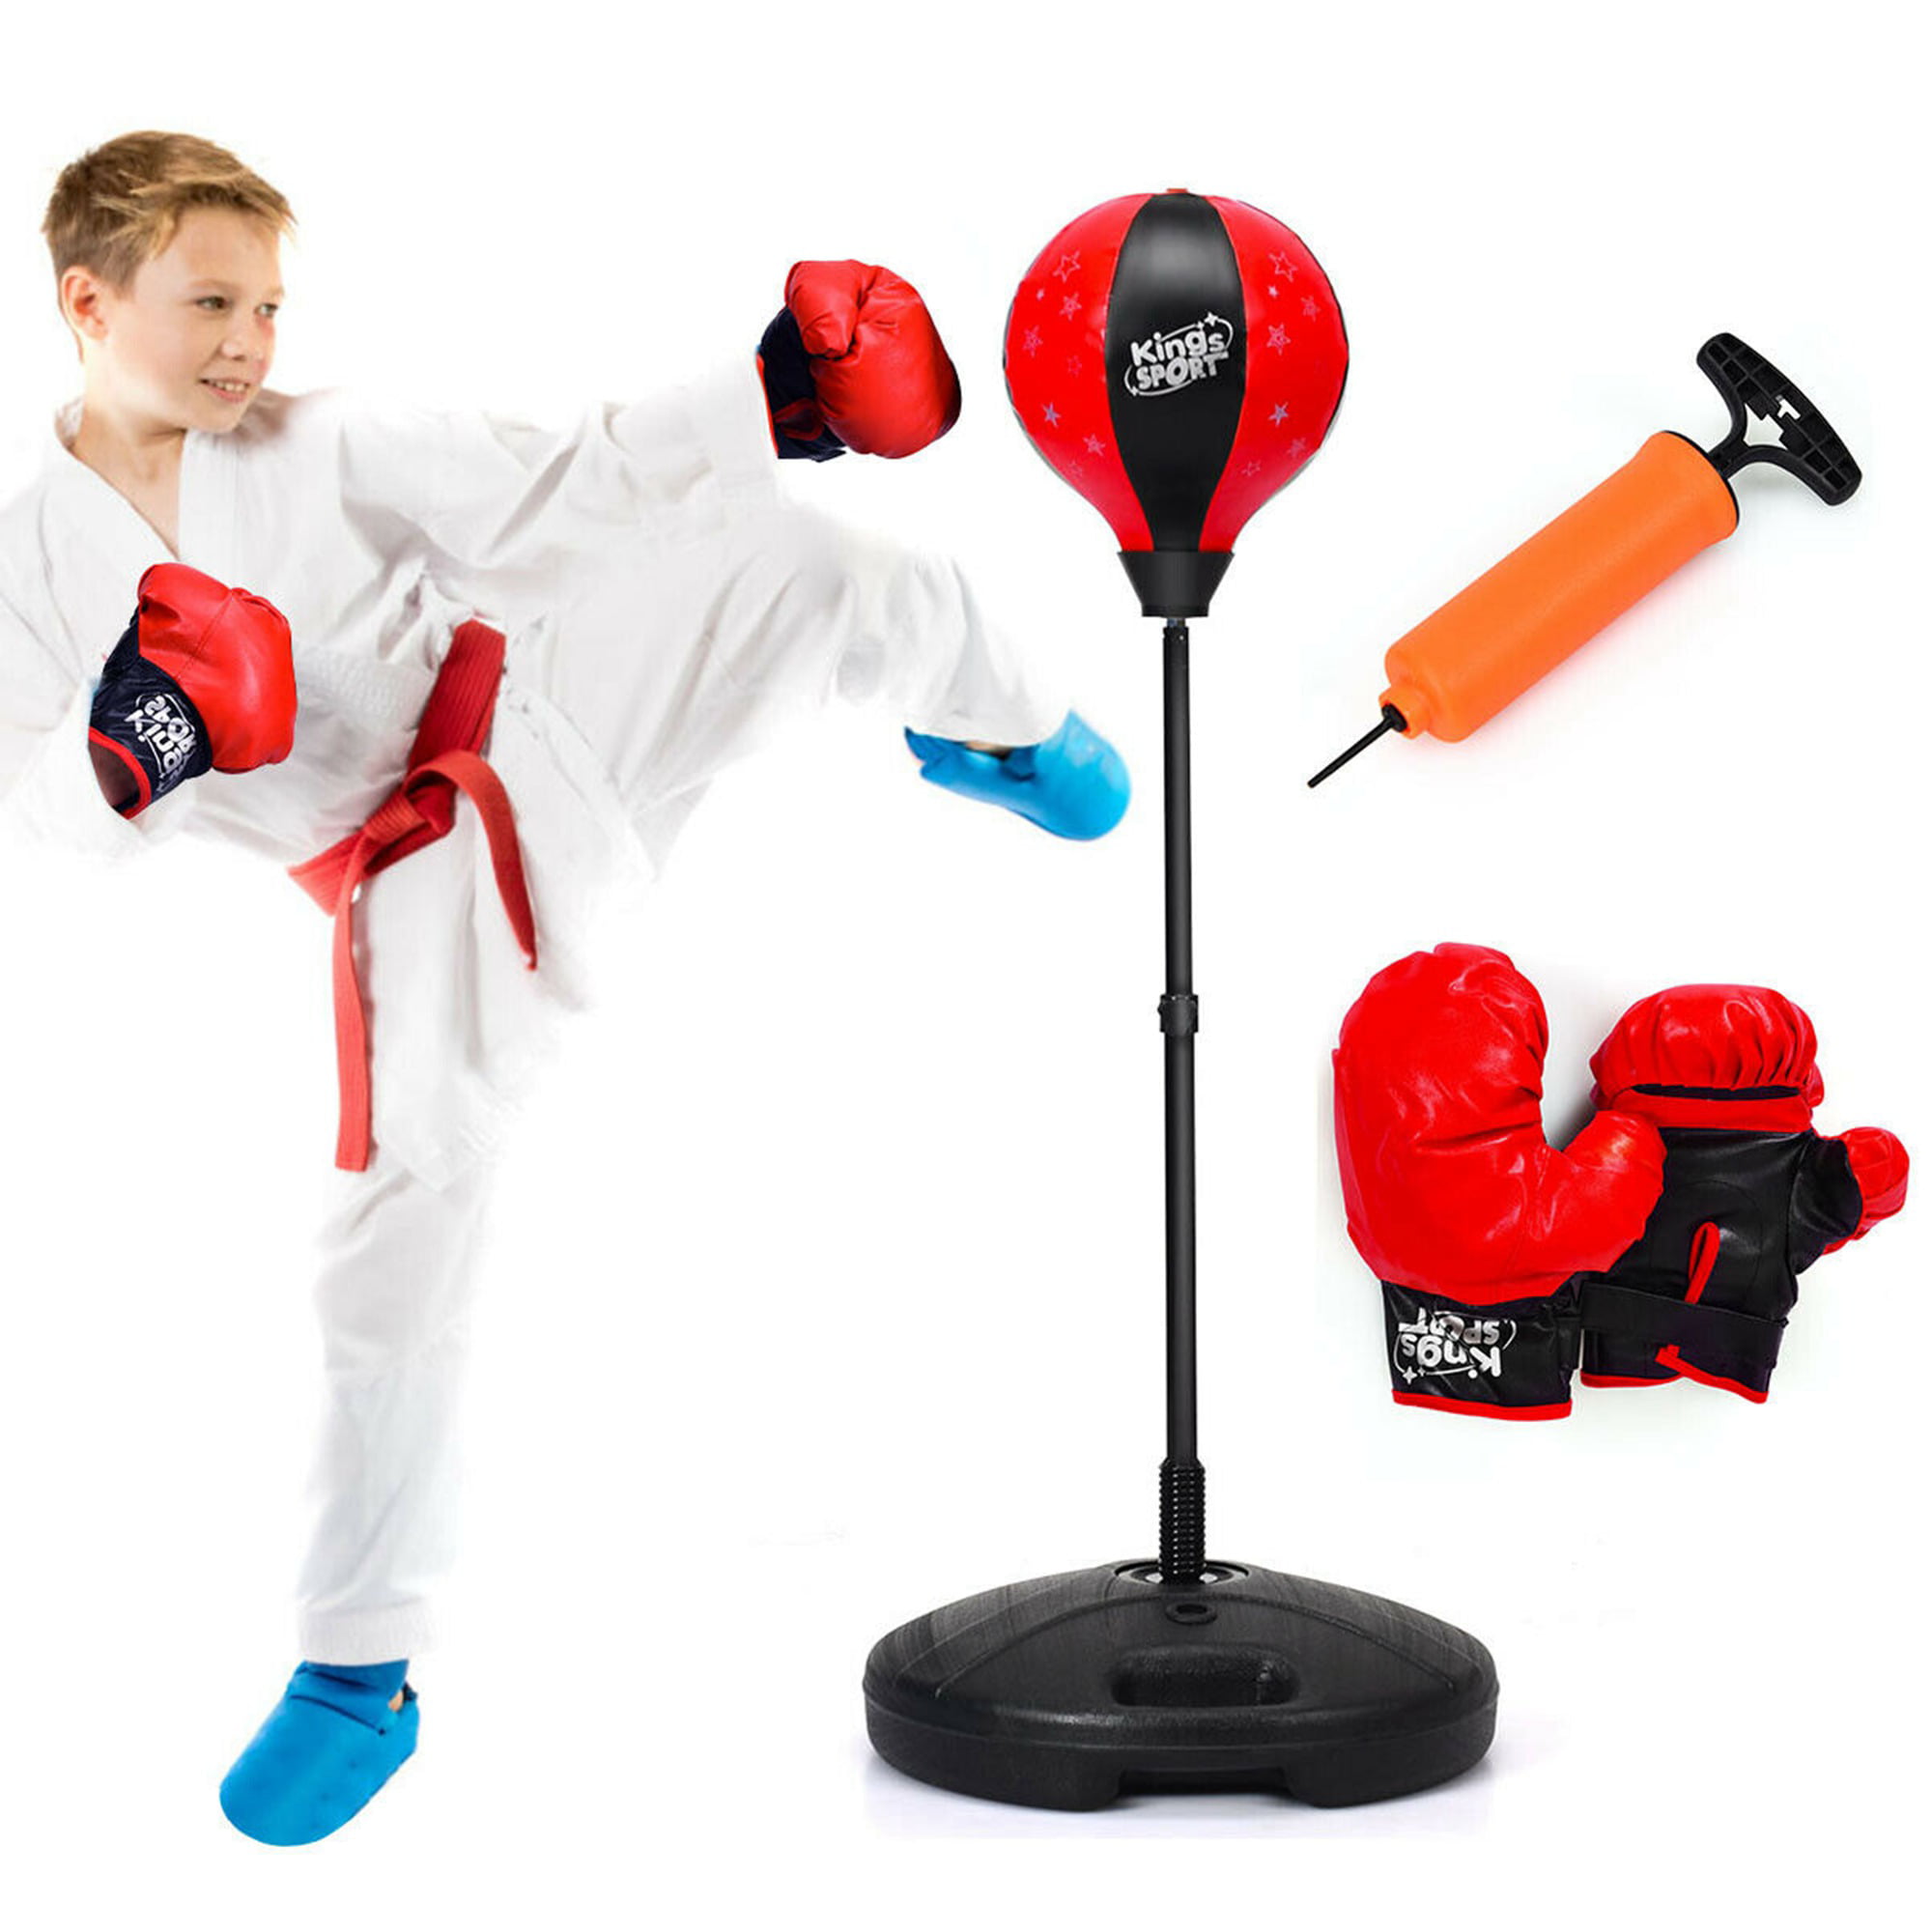 Speed Boxing Training PU Foam Ball Stress Relief Exercise Toy Liberty Imports Kids Desktop Punching Bag with Stand 